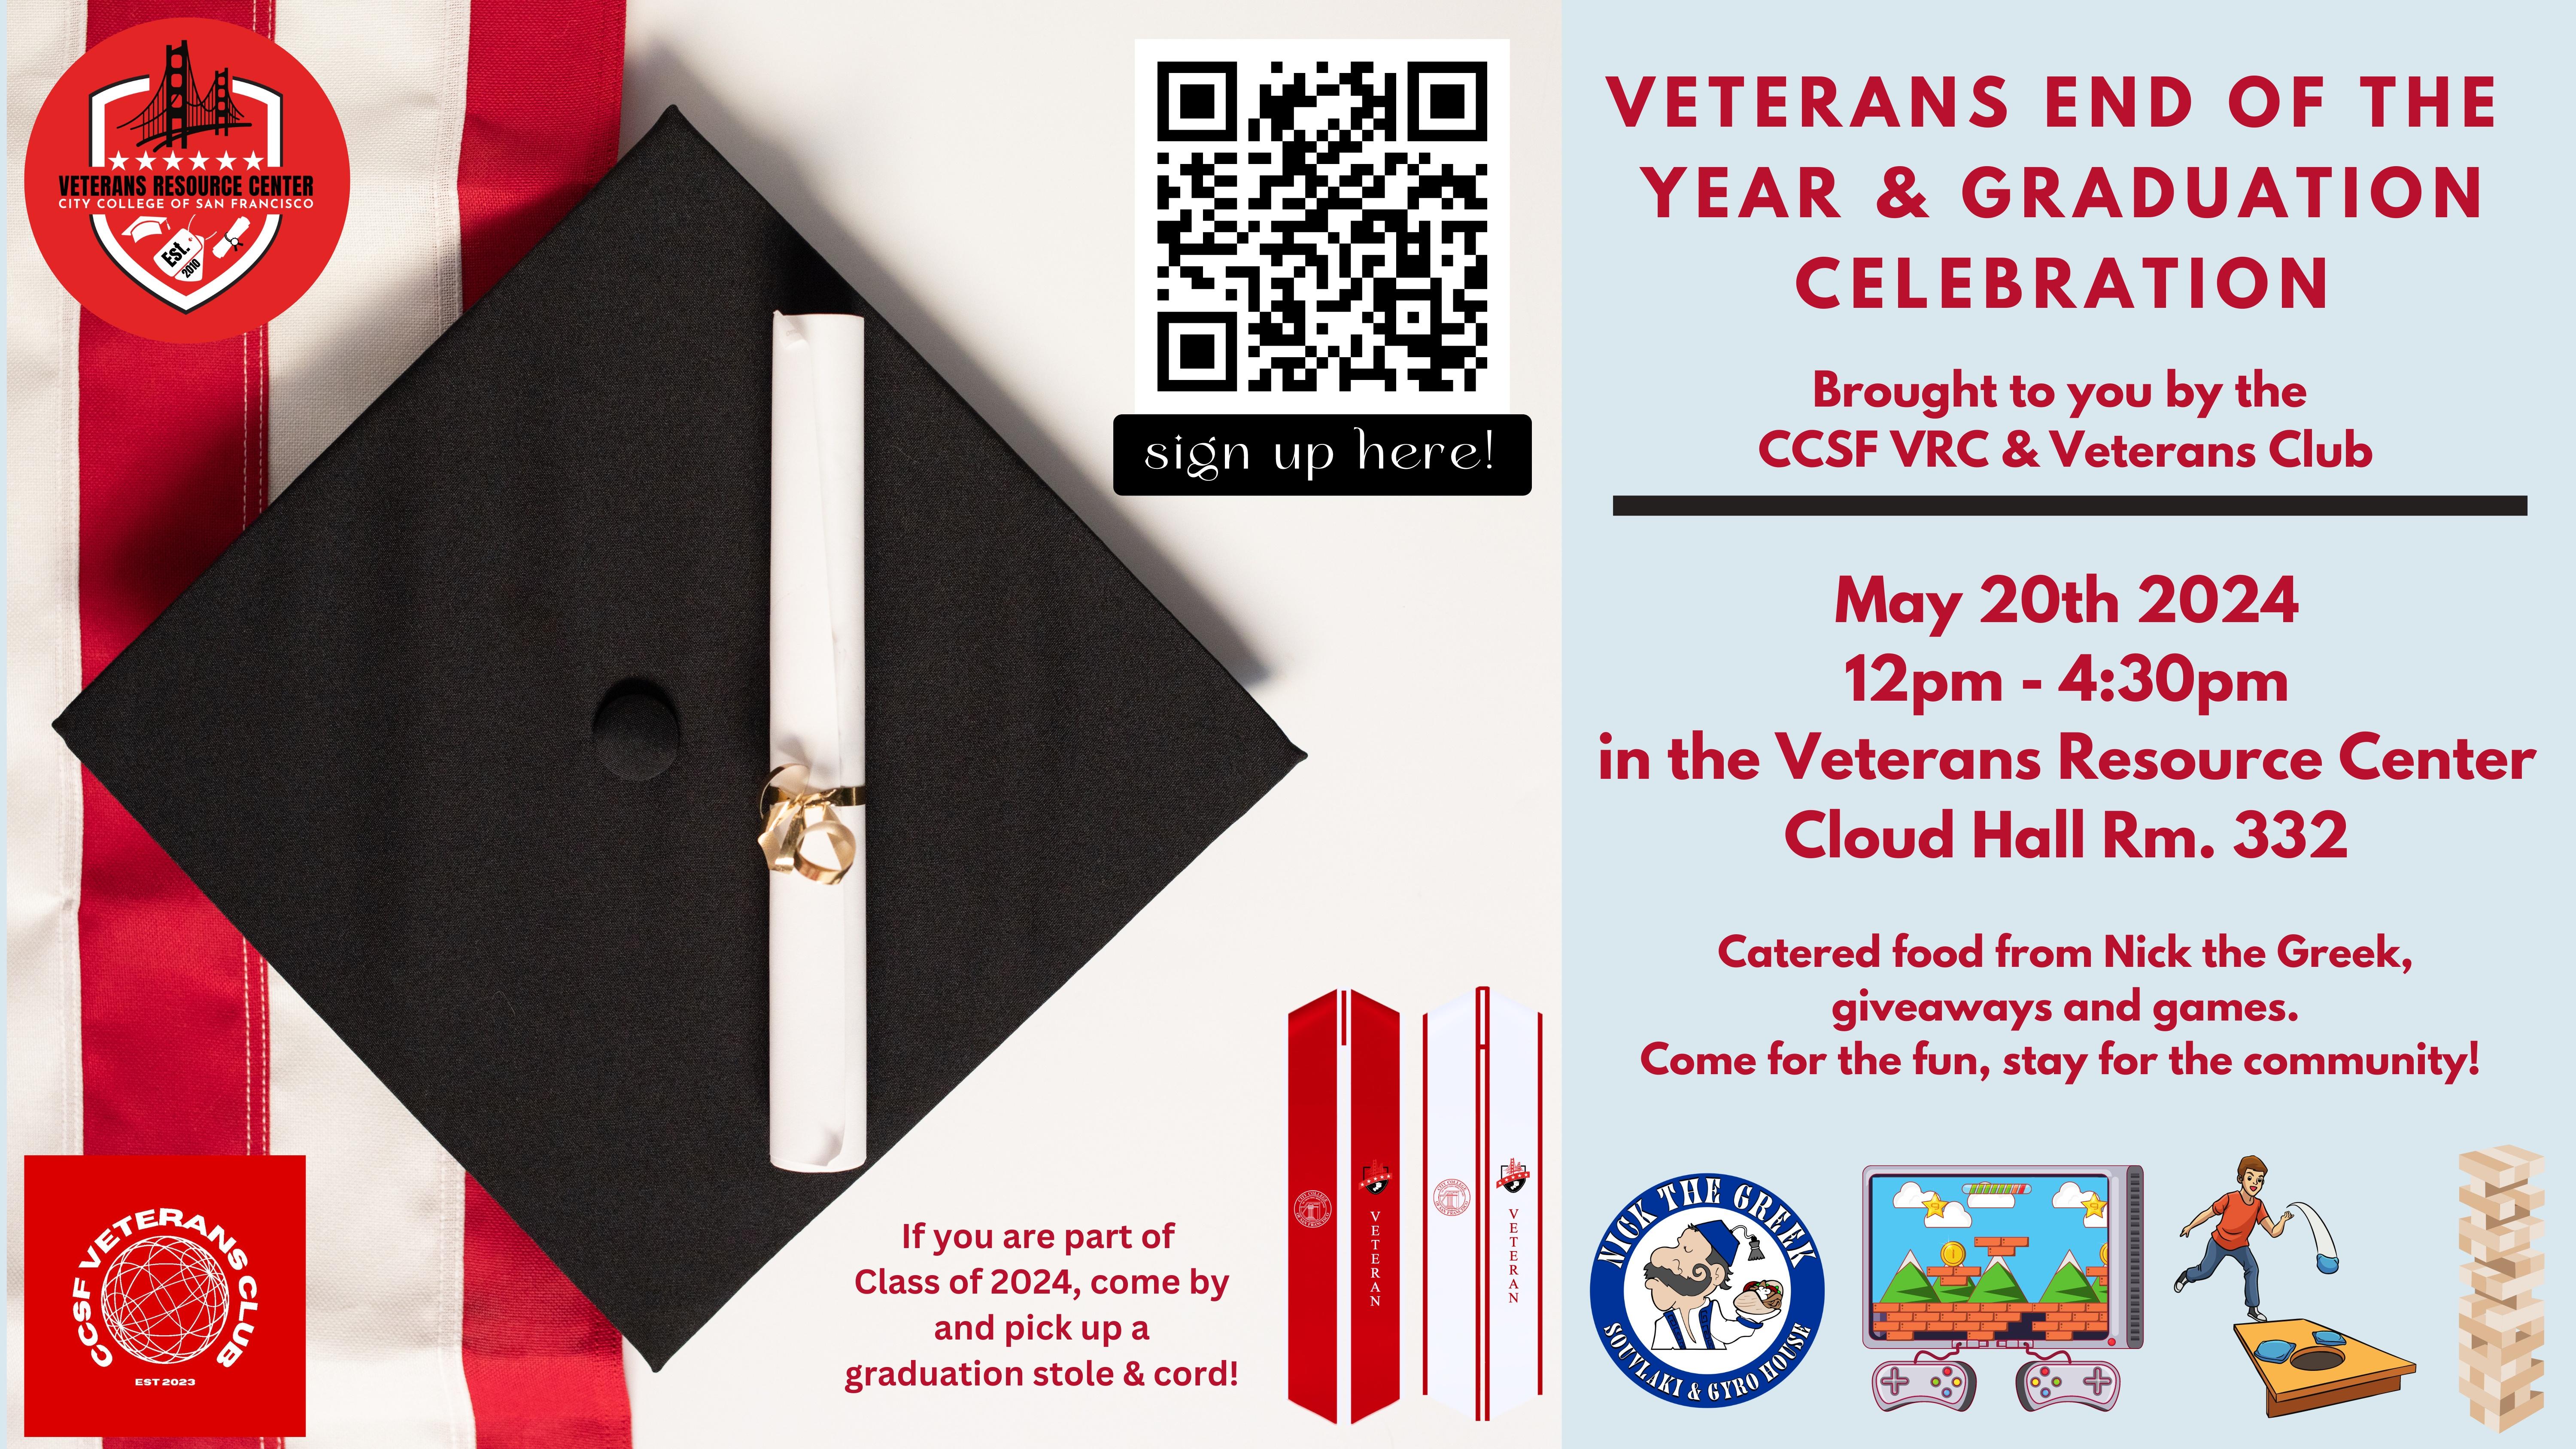 Veterans end of year & graduation celebration - May 20, 2024, 12-4:30pm Cloud Hall, Rm 332.